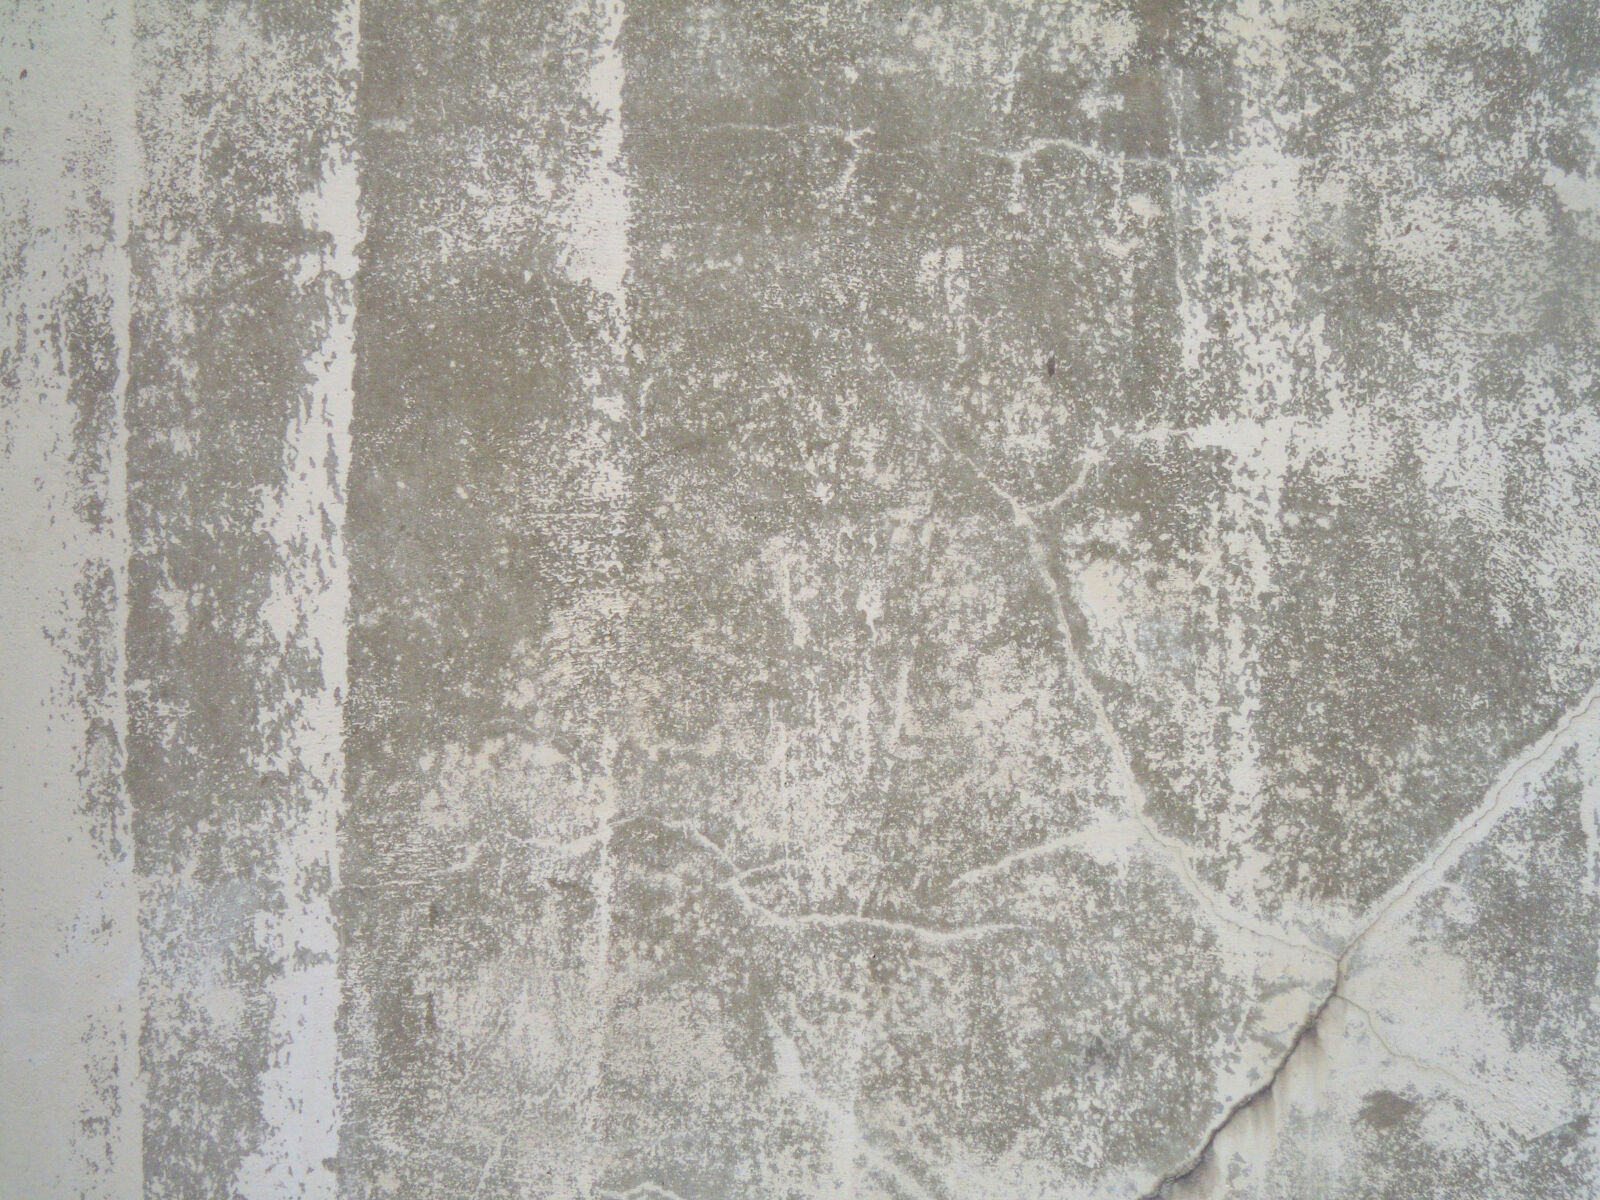 Nikon Coolpix S710 sample photo. Cement, wall photography